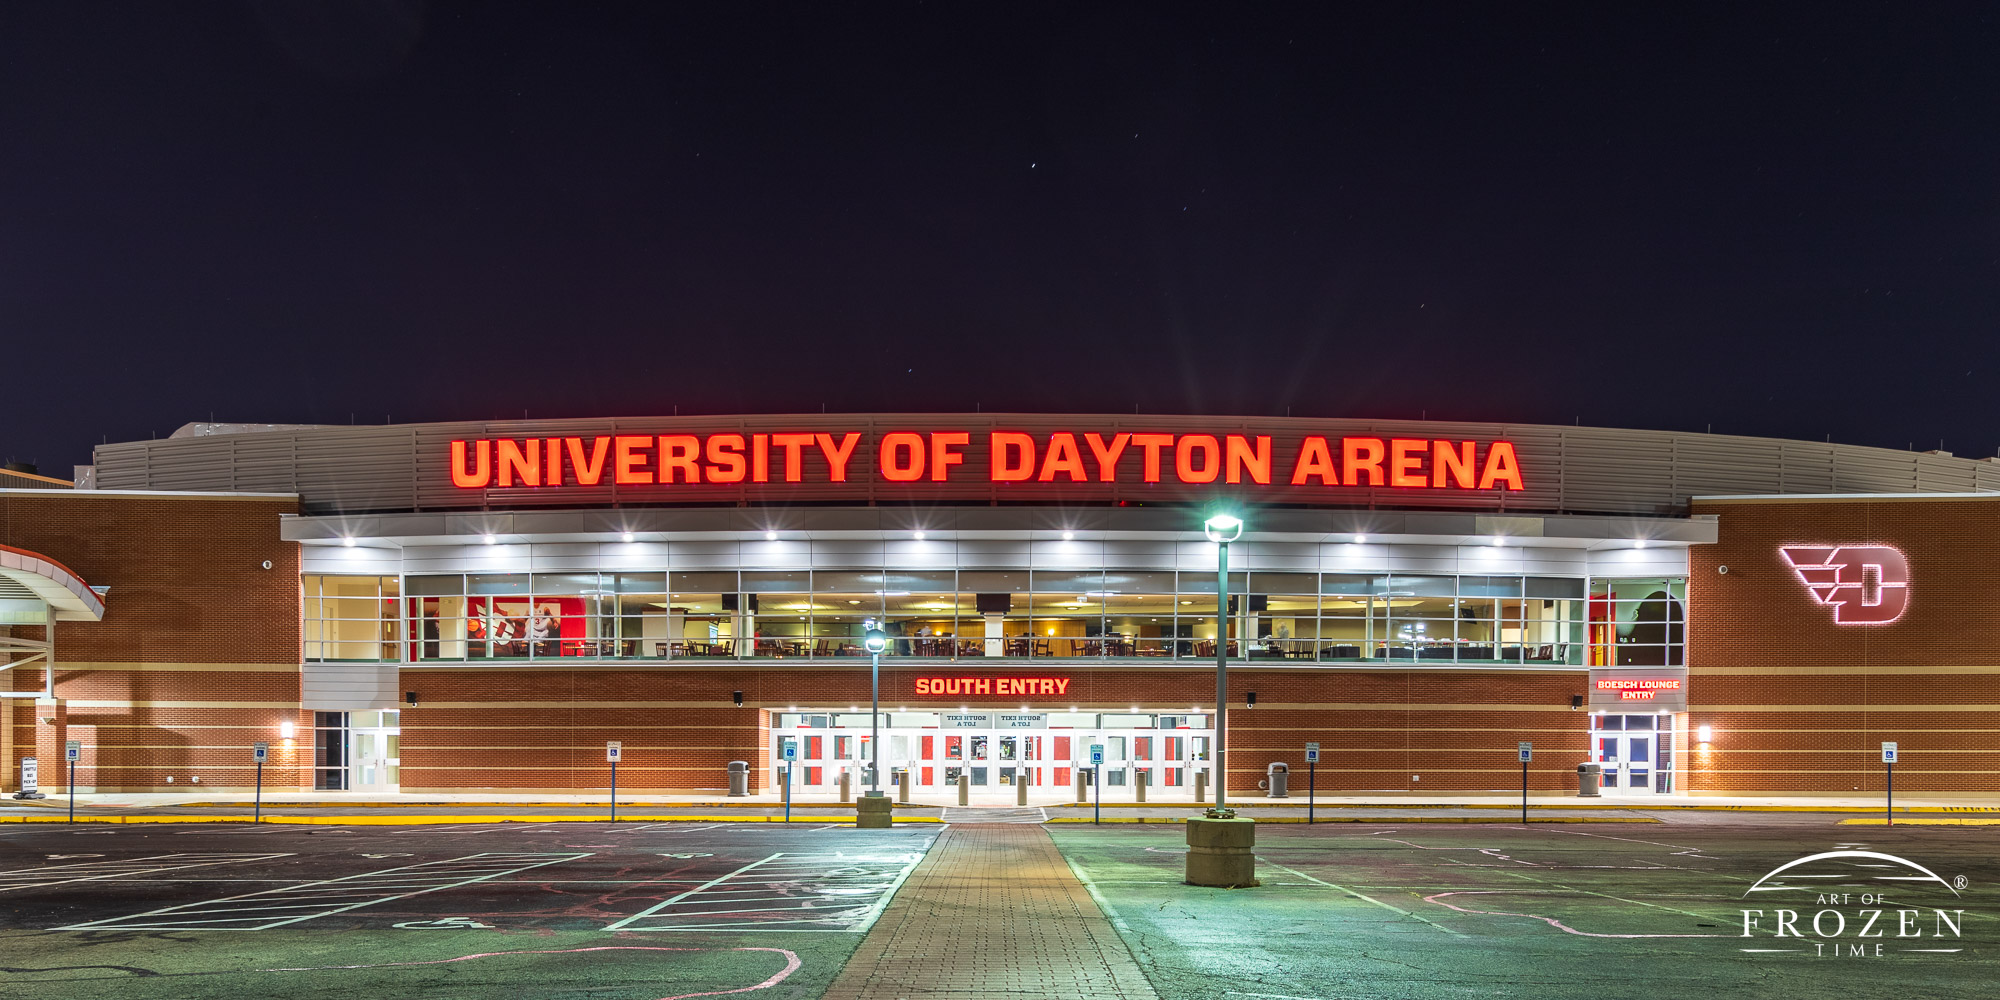 The revitalized University of Dayton area shines on this night scene on the outside as brightly as it does on the inside